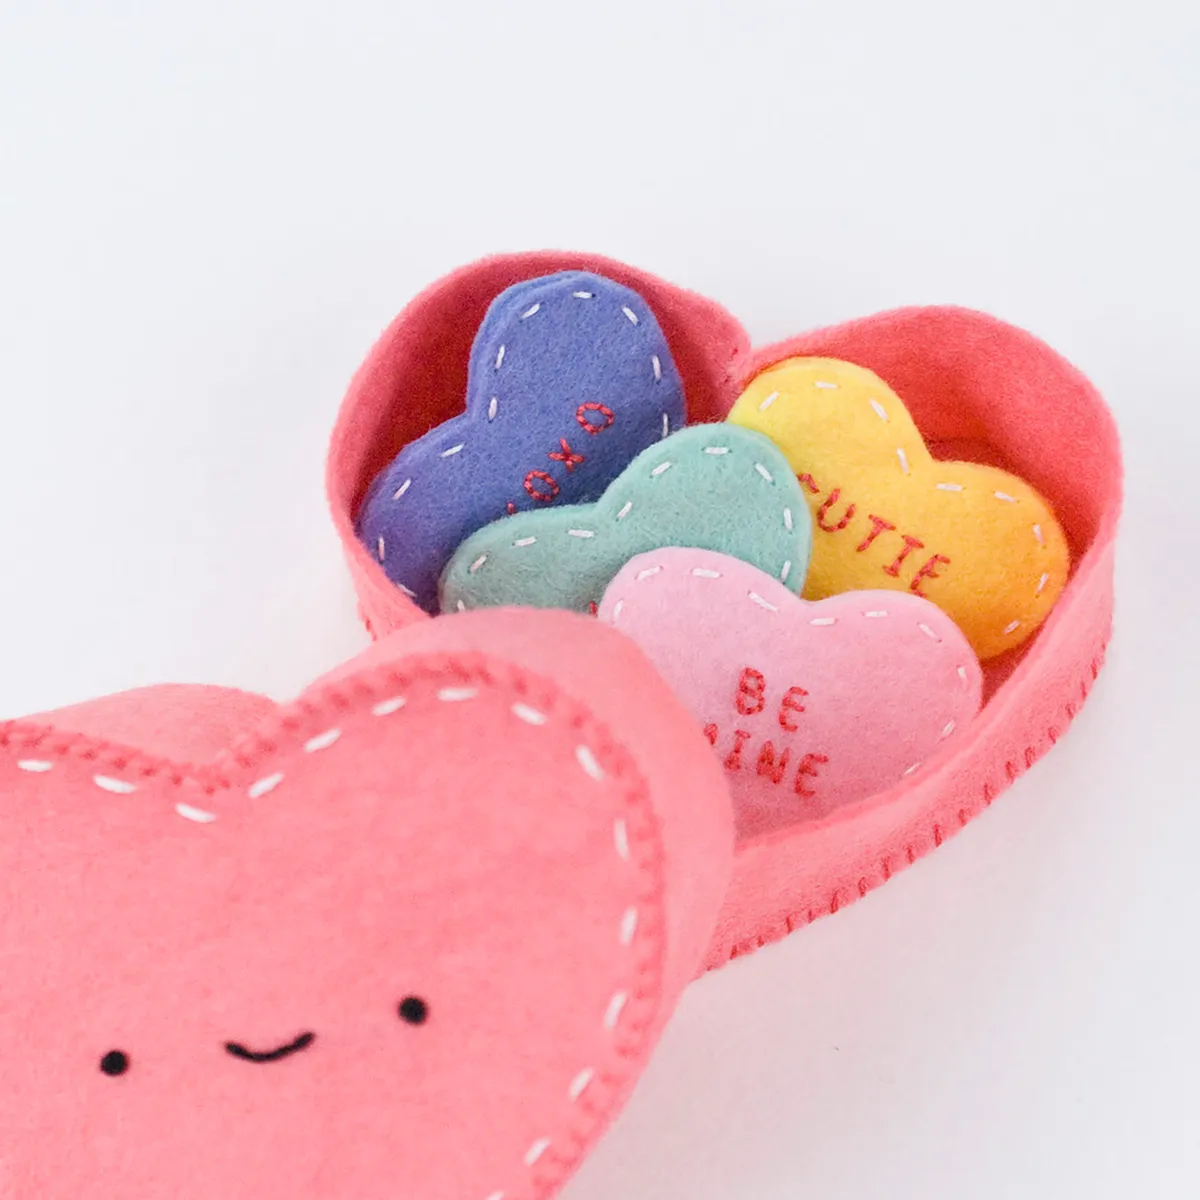 diy valentines decorations - love hearts in a pink felt box